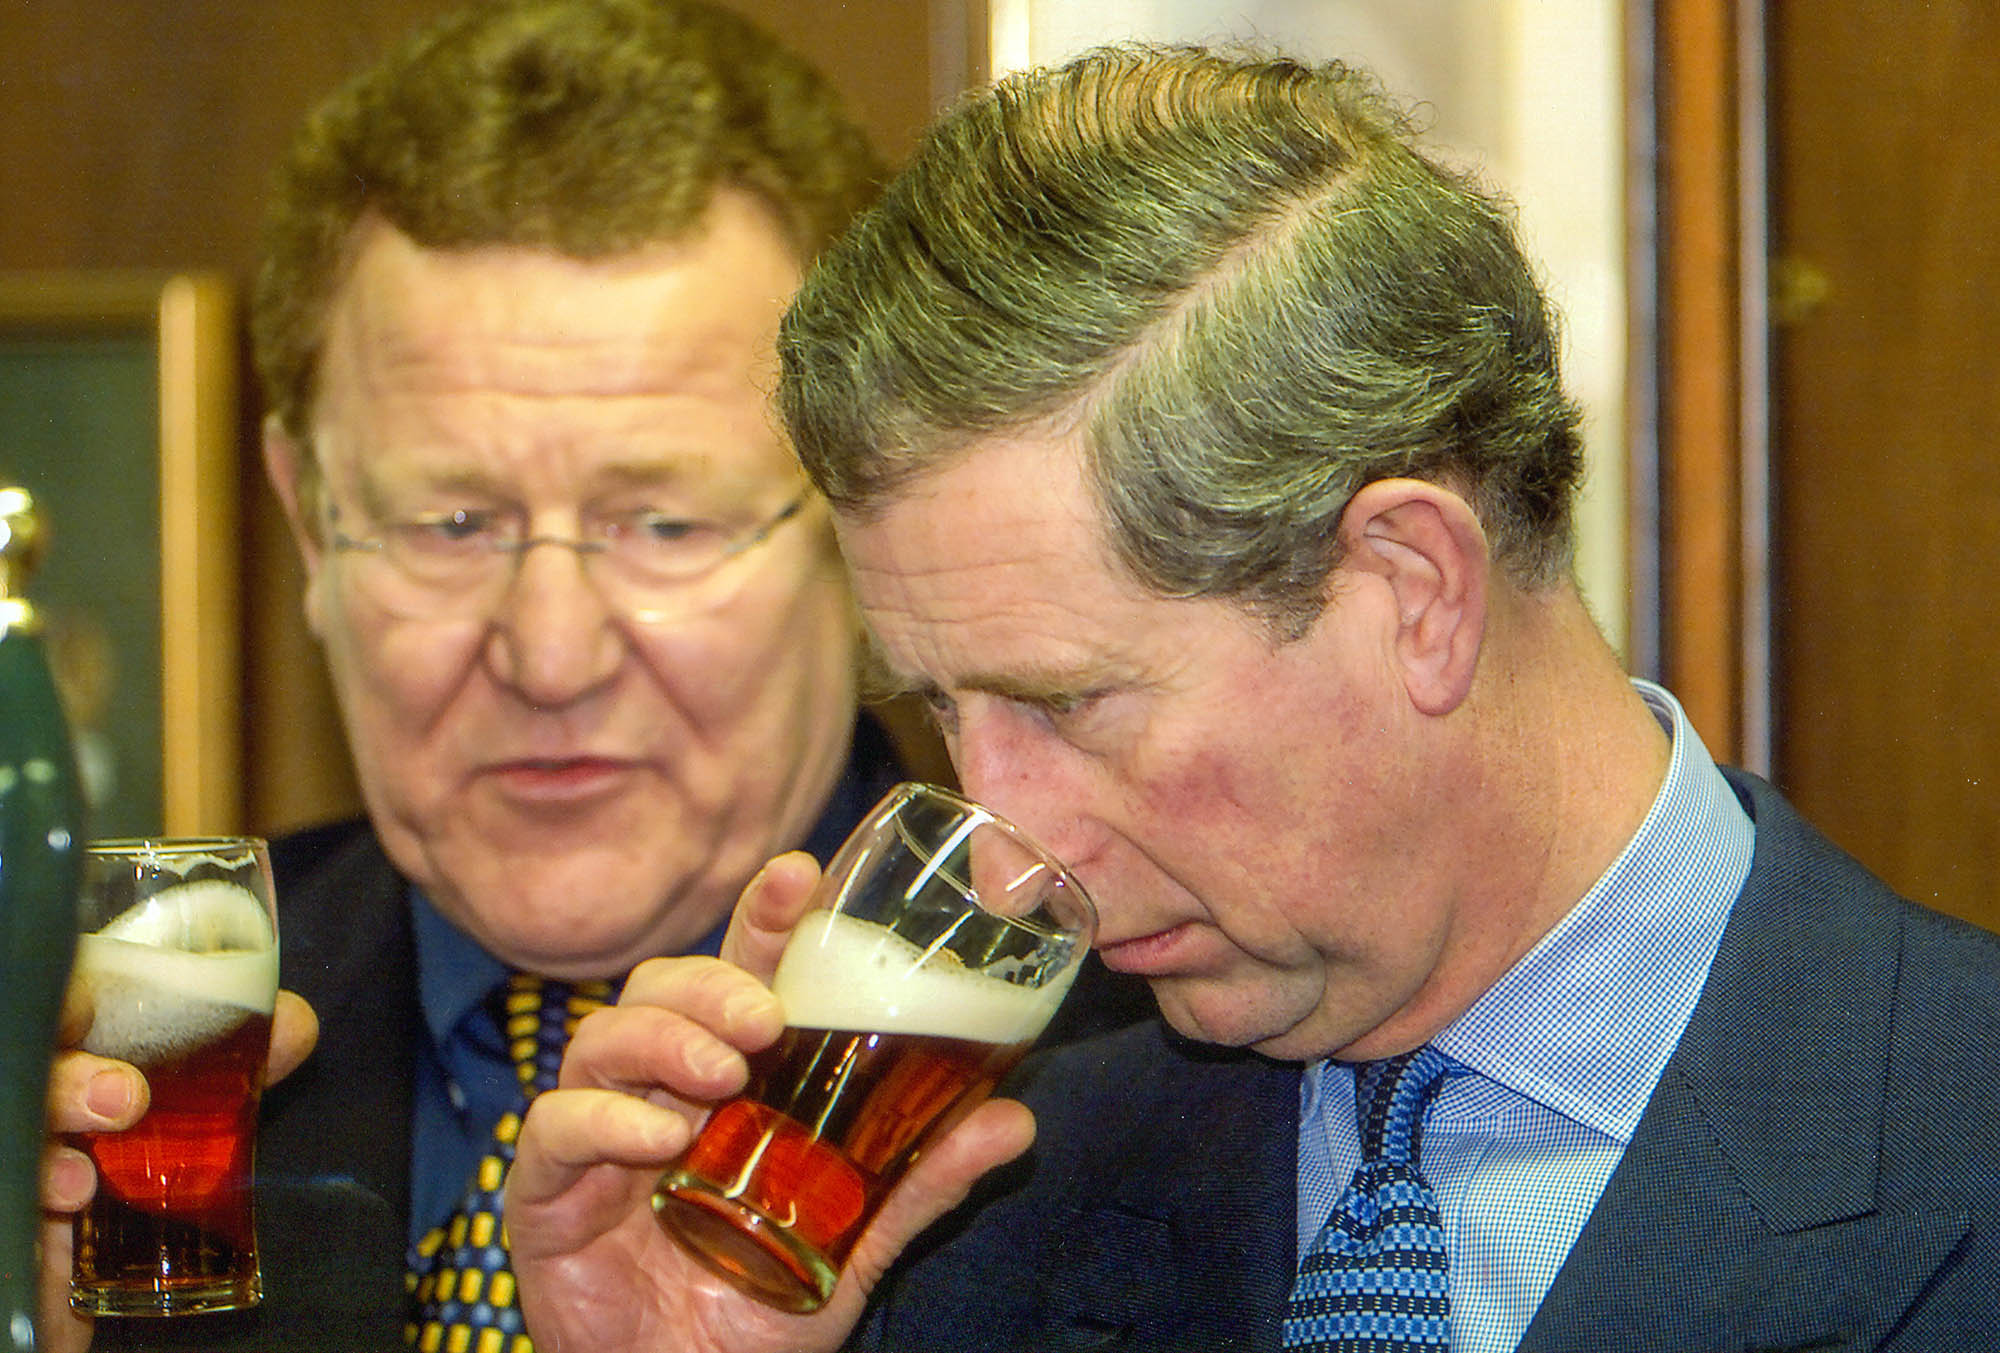 Prince Charles visits the Timothy Taylor brewery